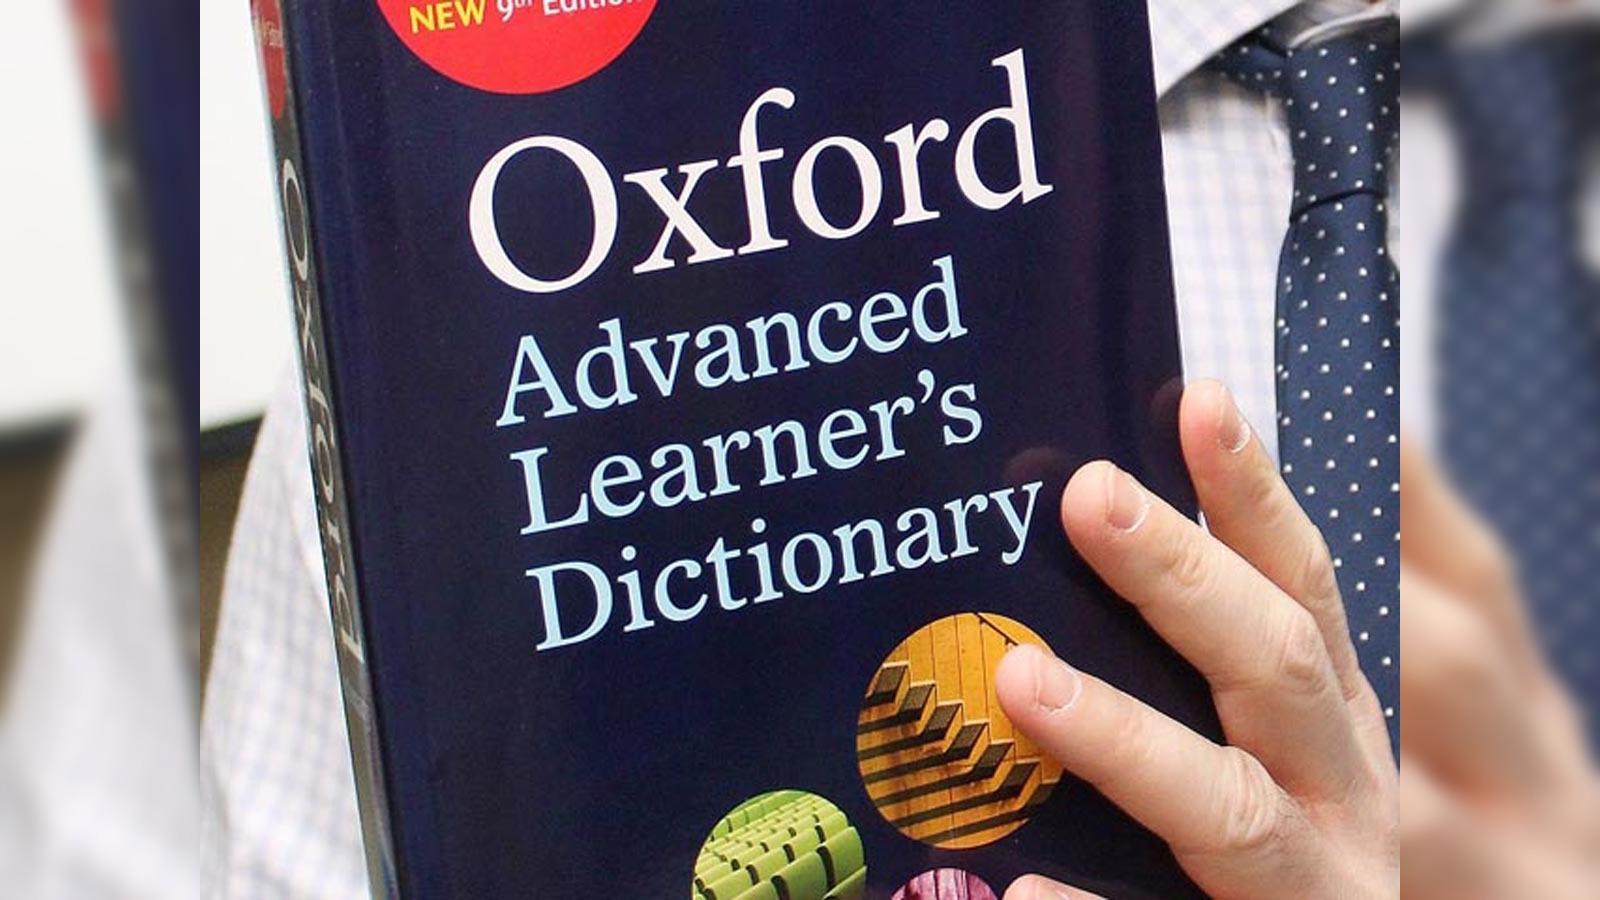 Oxford English Dictionary: Indian word 'chuddies' makes it to Oxford  Dictionary after being used in BBC show 'Goodness Gracious Me' - The  Economic Times